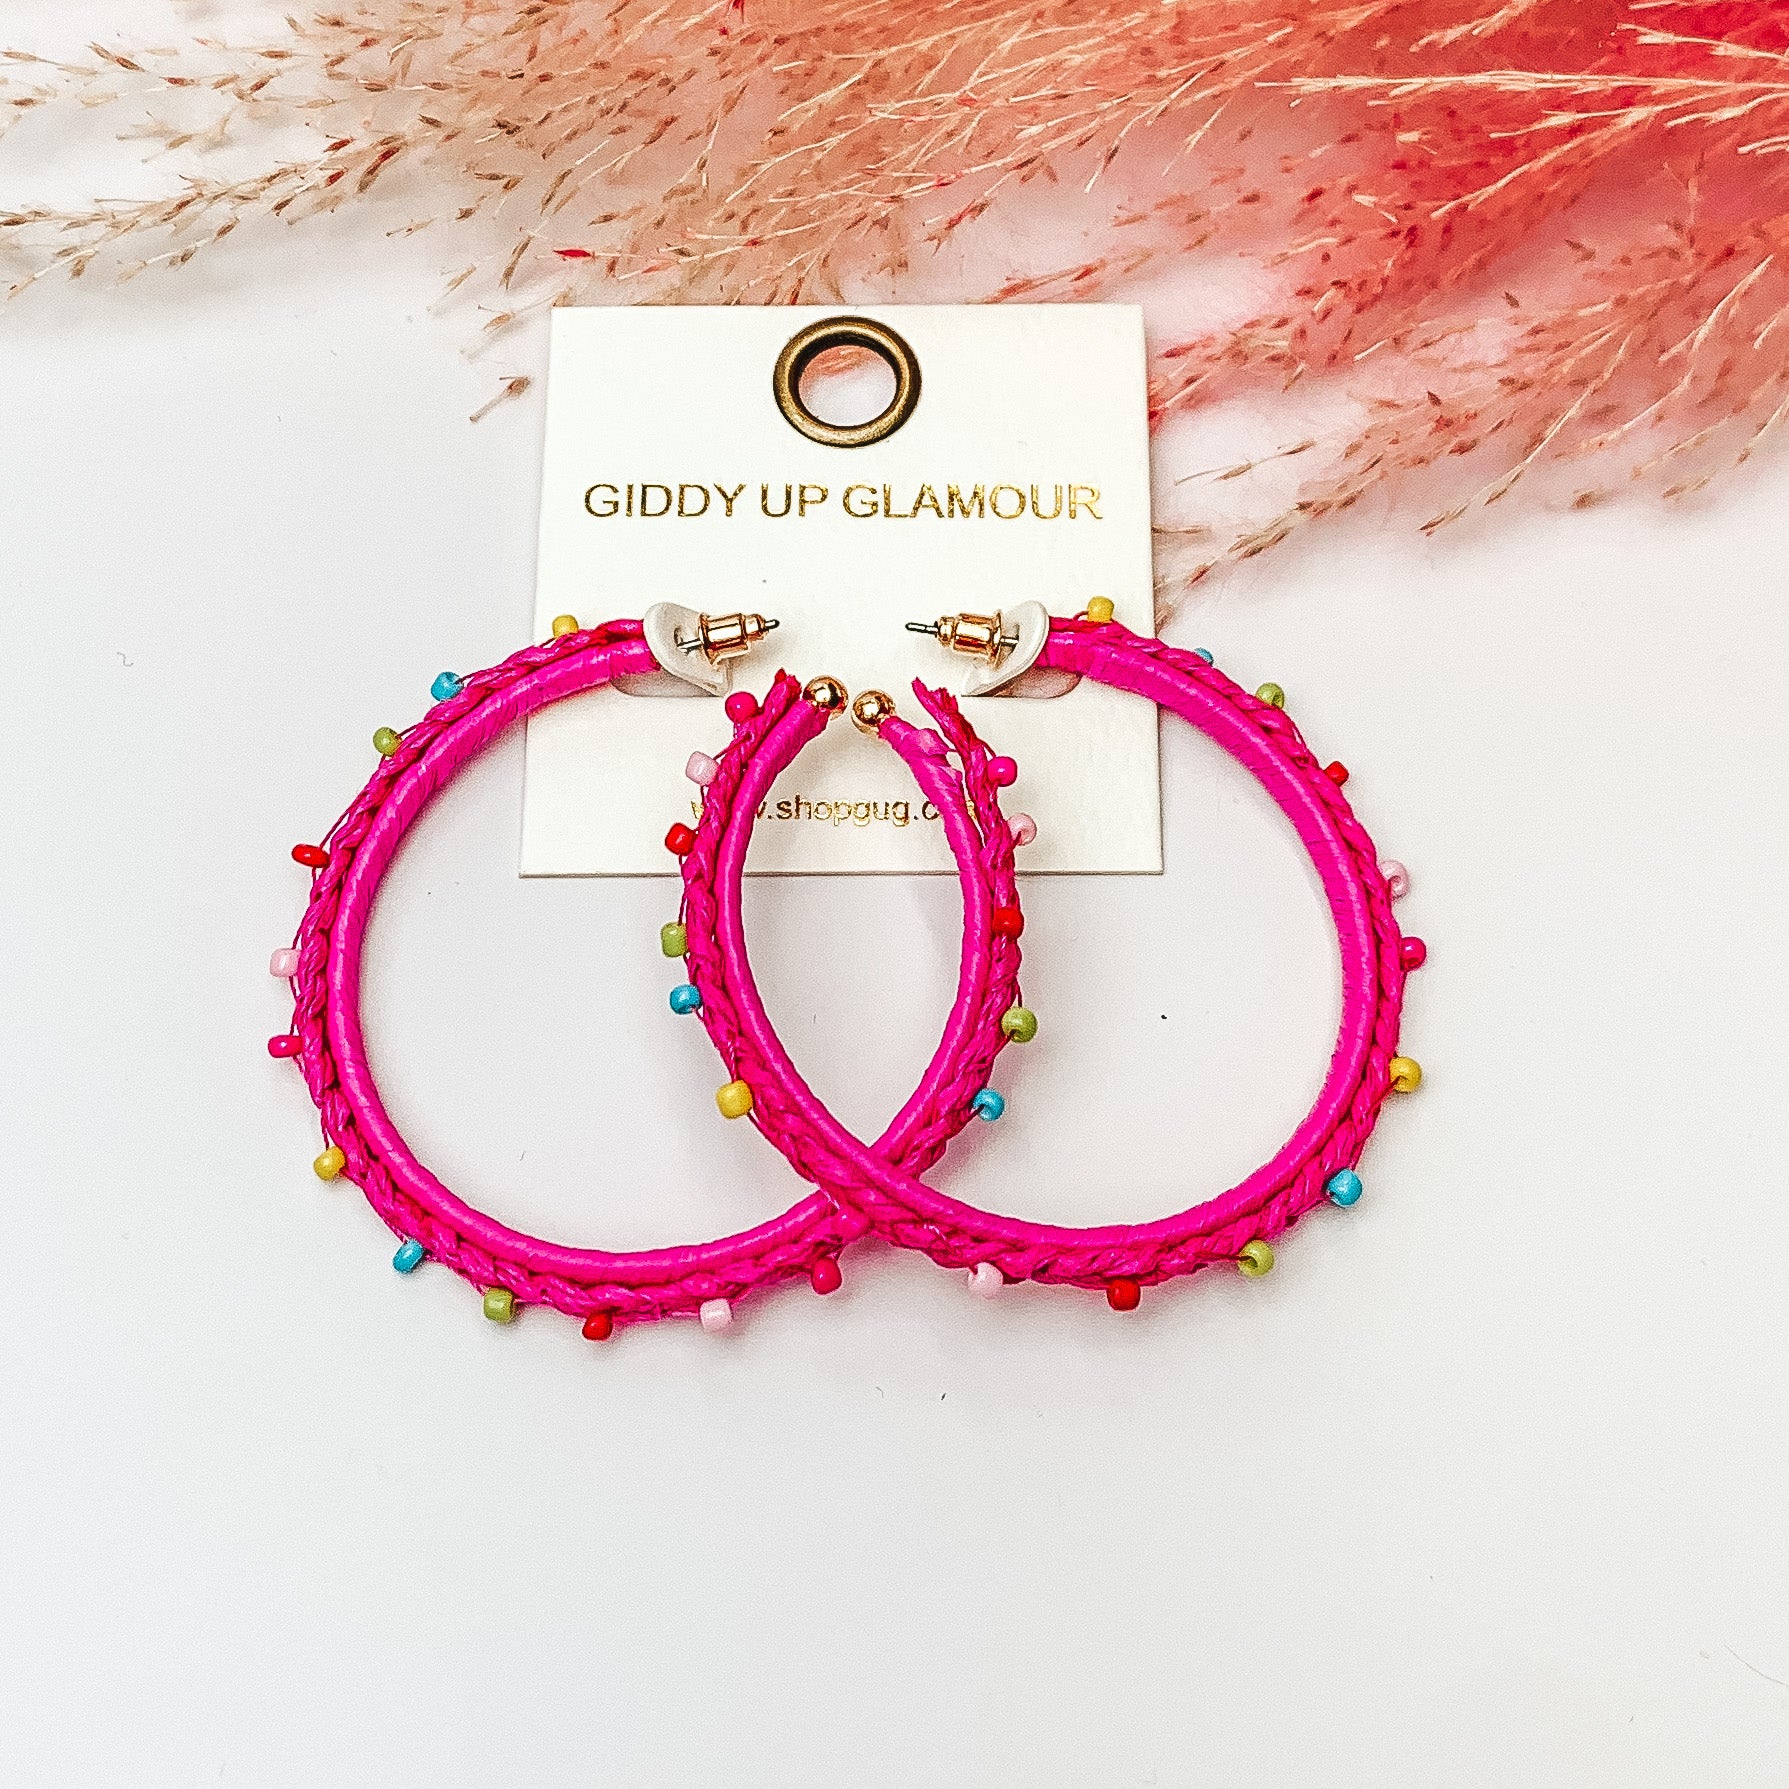 Pictured are raffia braided hoop earrings in fuschia with colorful beads. They are pictured with a pink feather on a white background.